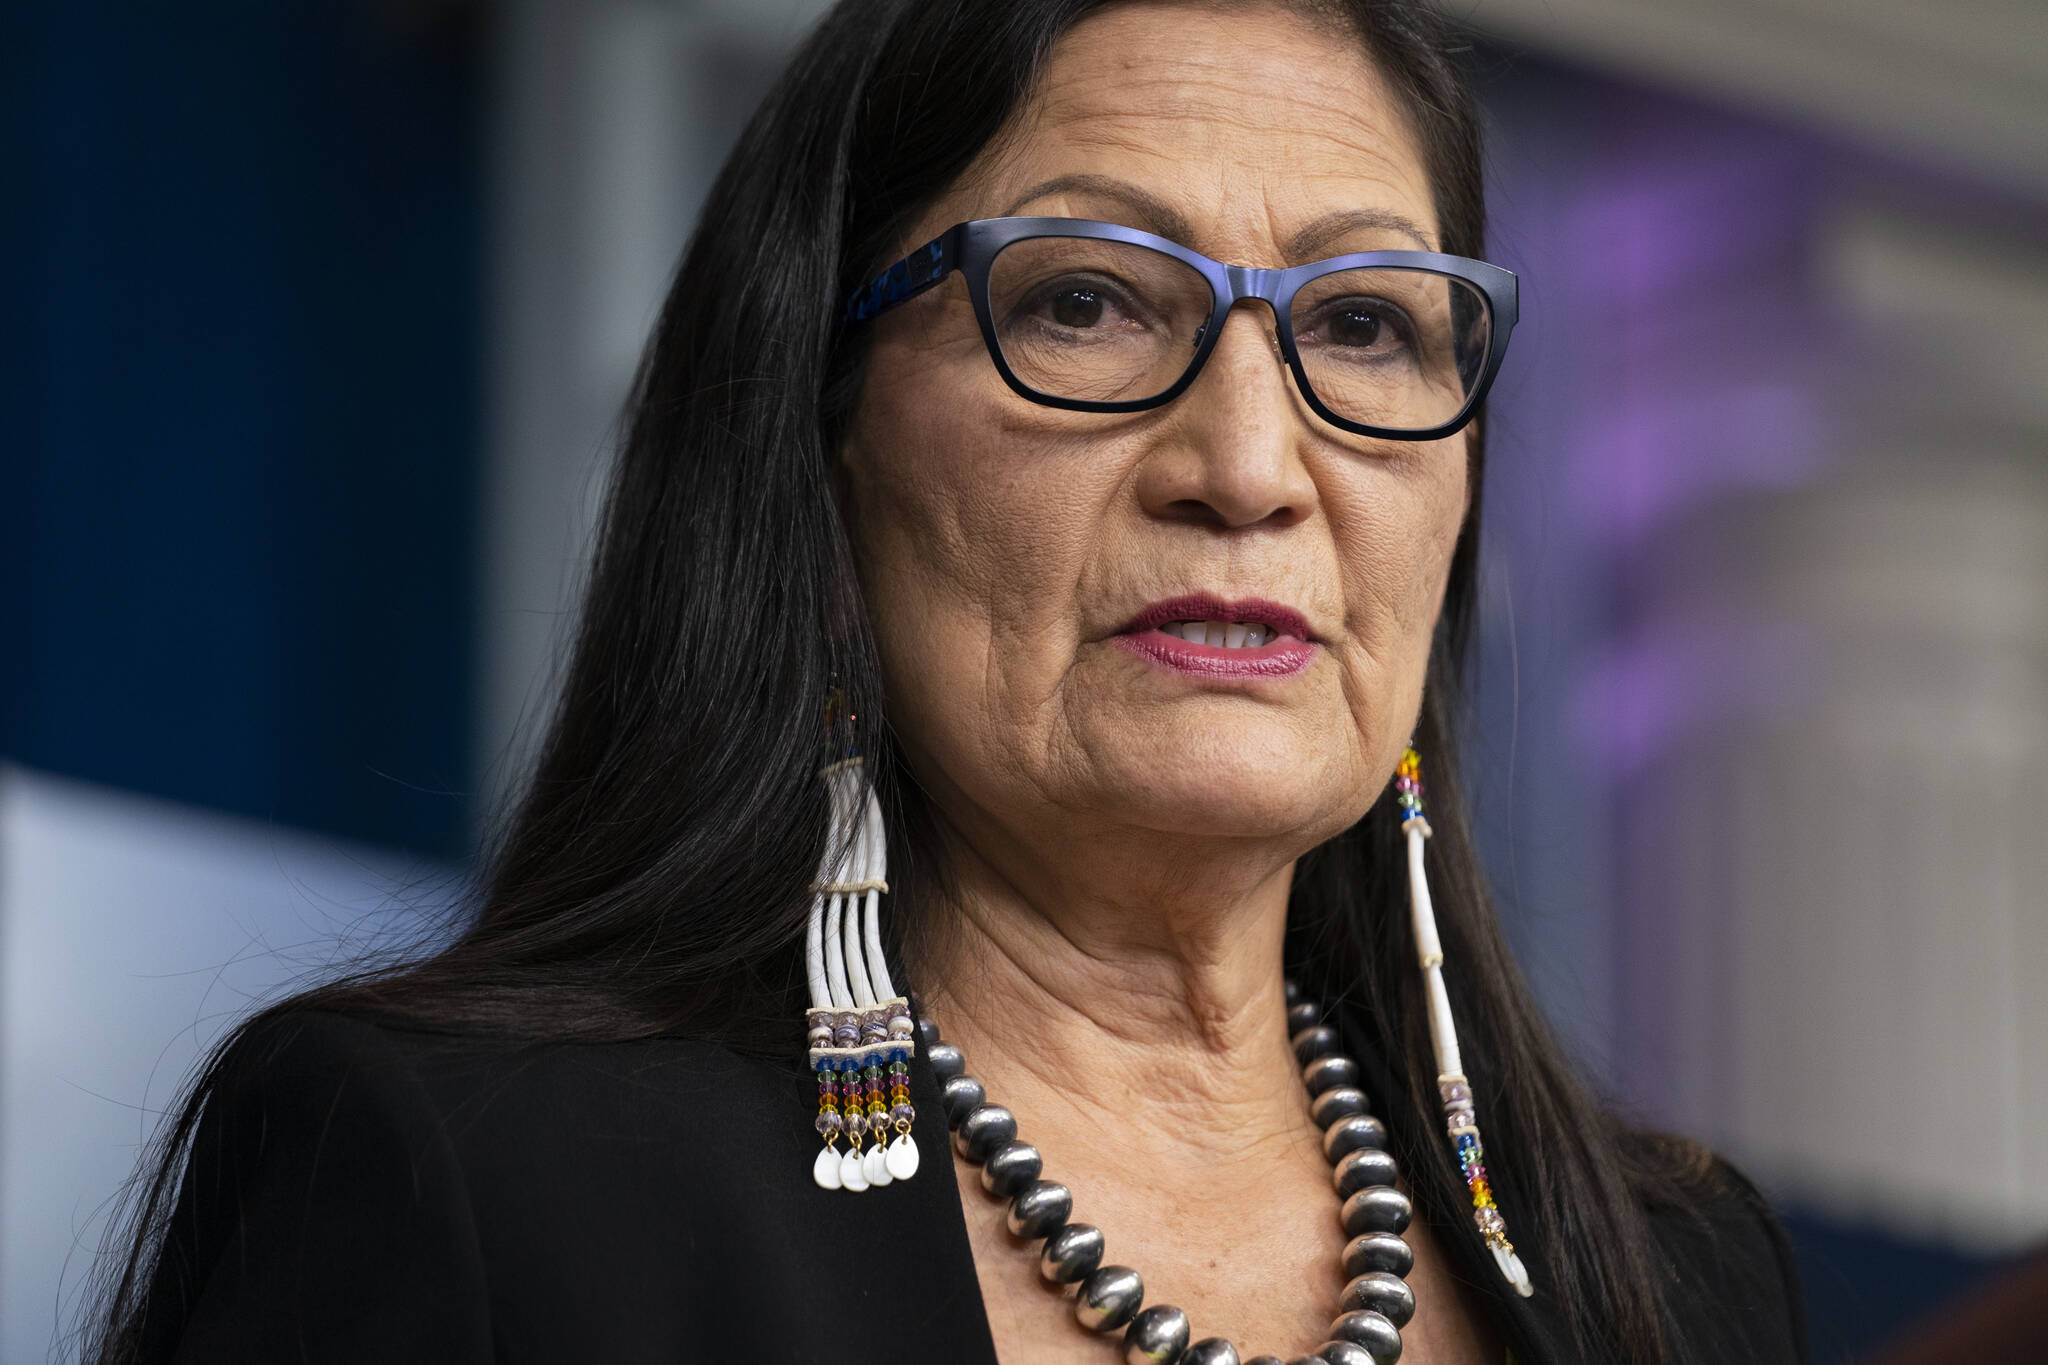 In this April 23, 2021 photo, Interior Secretary Deb Haaland speaks during a news briefing at the White House in Washington. Secretary Haaland vowed on her first day on the job to ensure Native American tribes have opportunities to speak with her and the agencies she oversees. Native American and Alaska Native groups are seeing change under Haaland but some remain frustrated with the pace of action. (AP Photo / Evan Vucci)